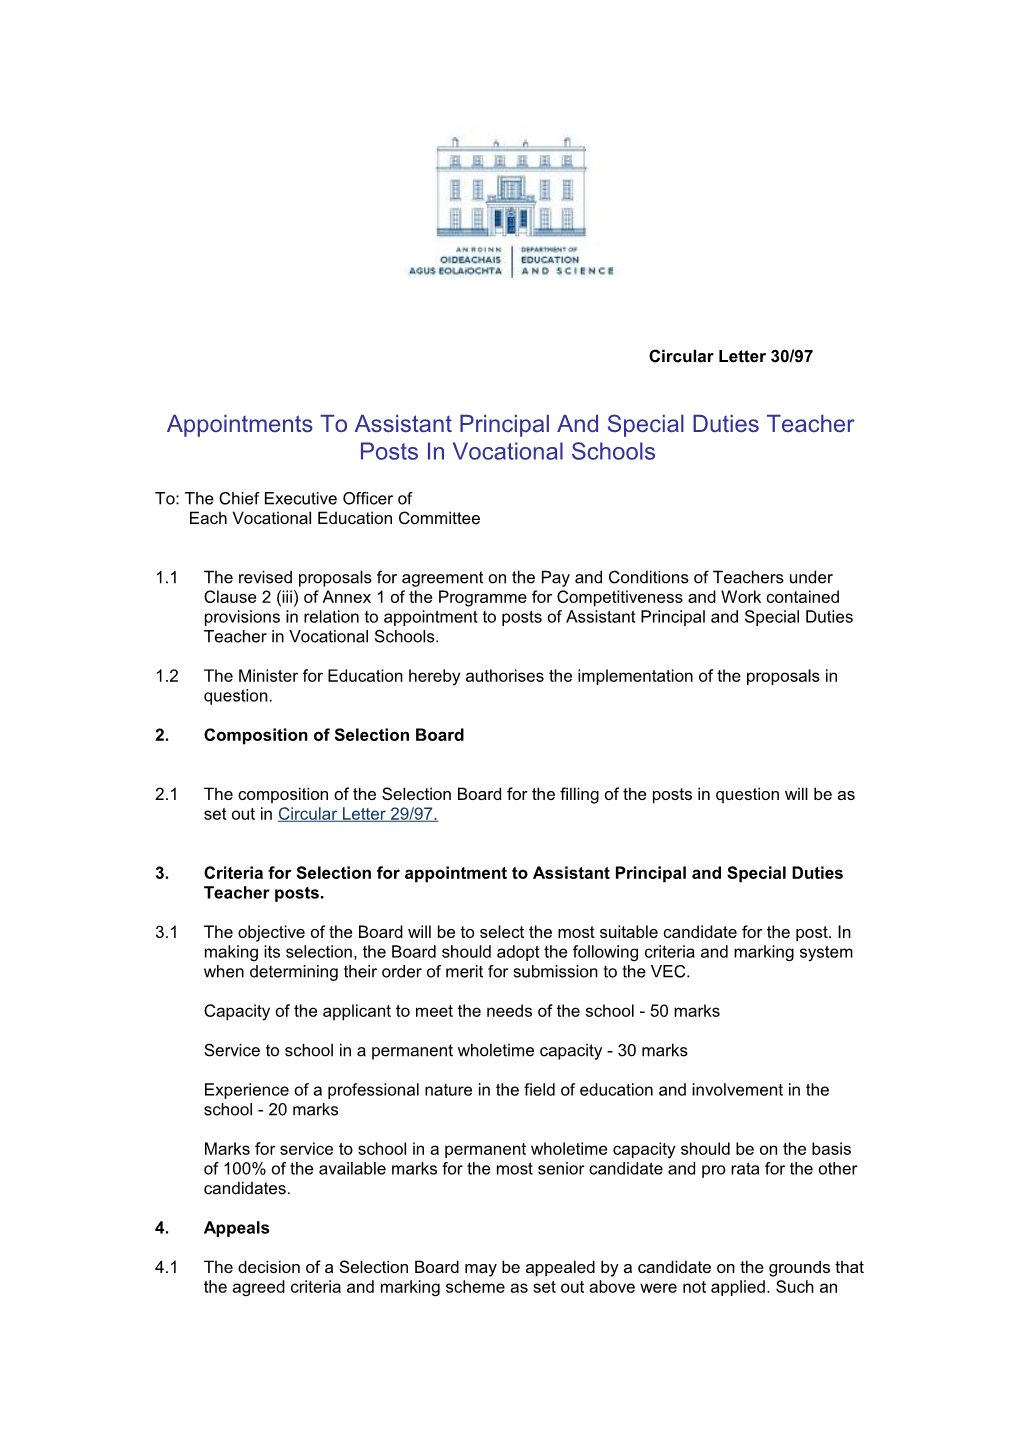 Circular 30/97 - Appointments to Assistant Principal and Special Duties Teacher Posts In